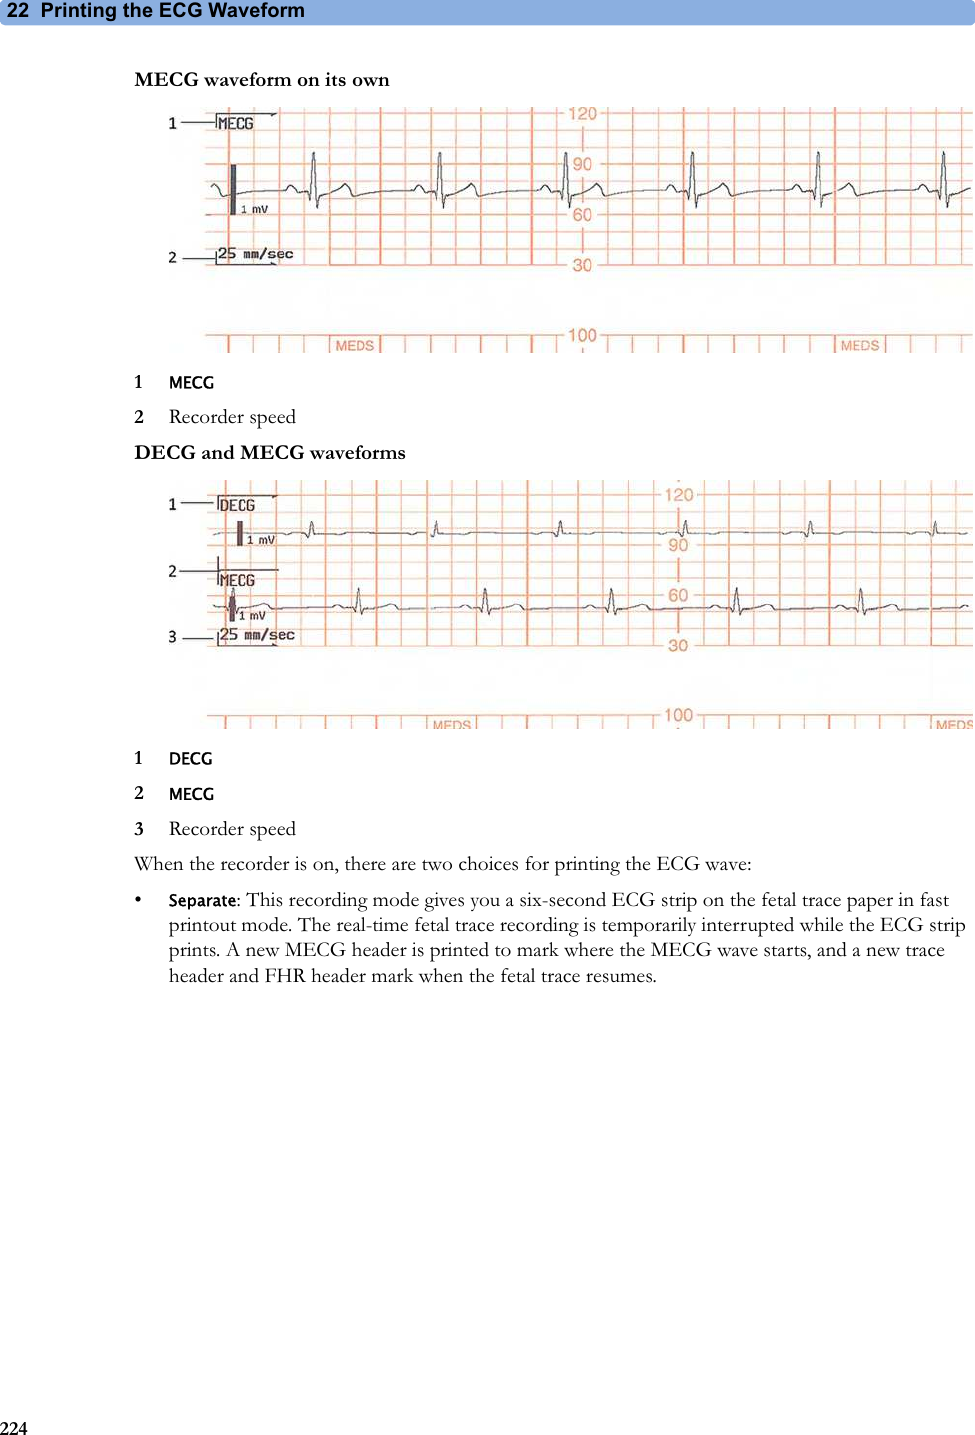 22  Printing the ECG Waveform224MECG waveform on its own1MECG2Recorder speedDECG and MECG waveforms1DECG2MECG3Recorder speedWhen the recorder is on, there are two choices for printing the ECG wave:•Separate: This recording mode gives you a six-second ECG strip on the fetal trace paper in fast printout mode. The real-time fetal trace recording is temporarily interrupted while the ECG strip prints. A new MECG header is printed to mark where the MECG wave starts, and a new trace header and FHR header mark when the fetal trace resumes.